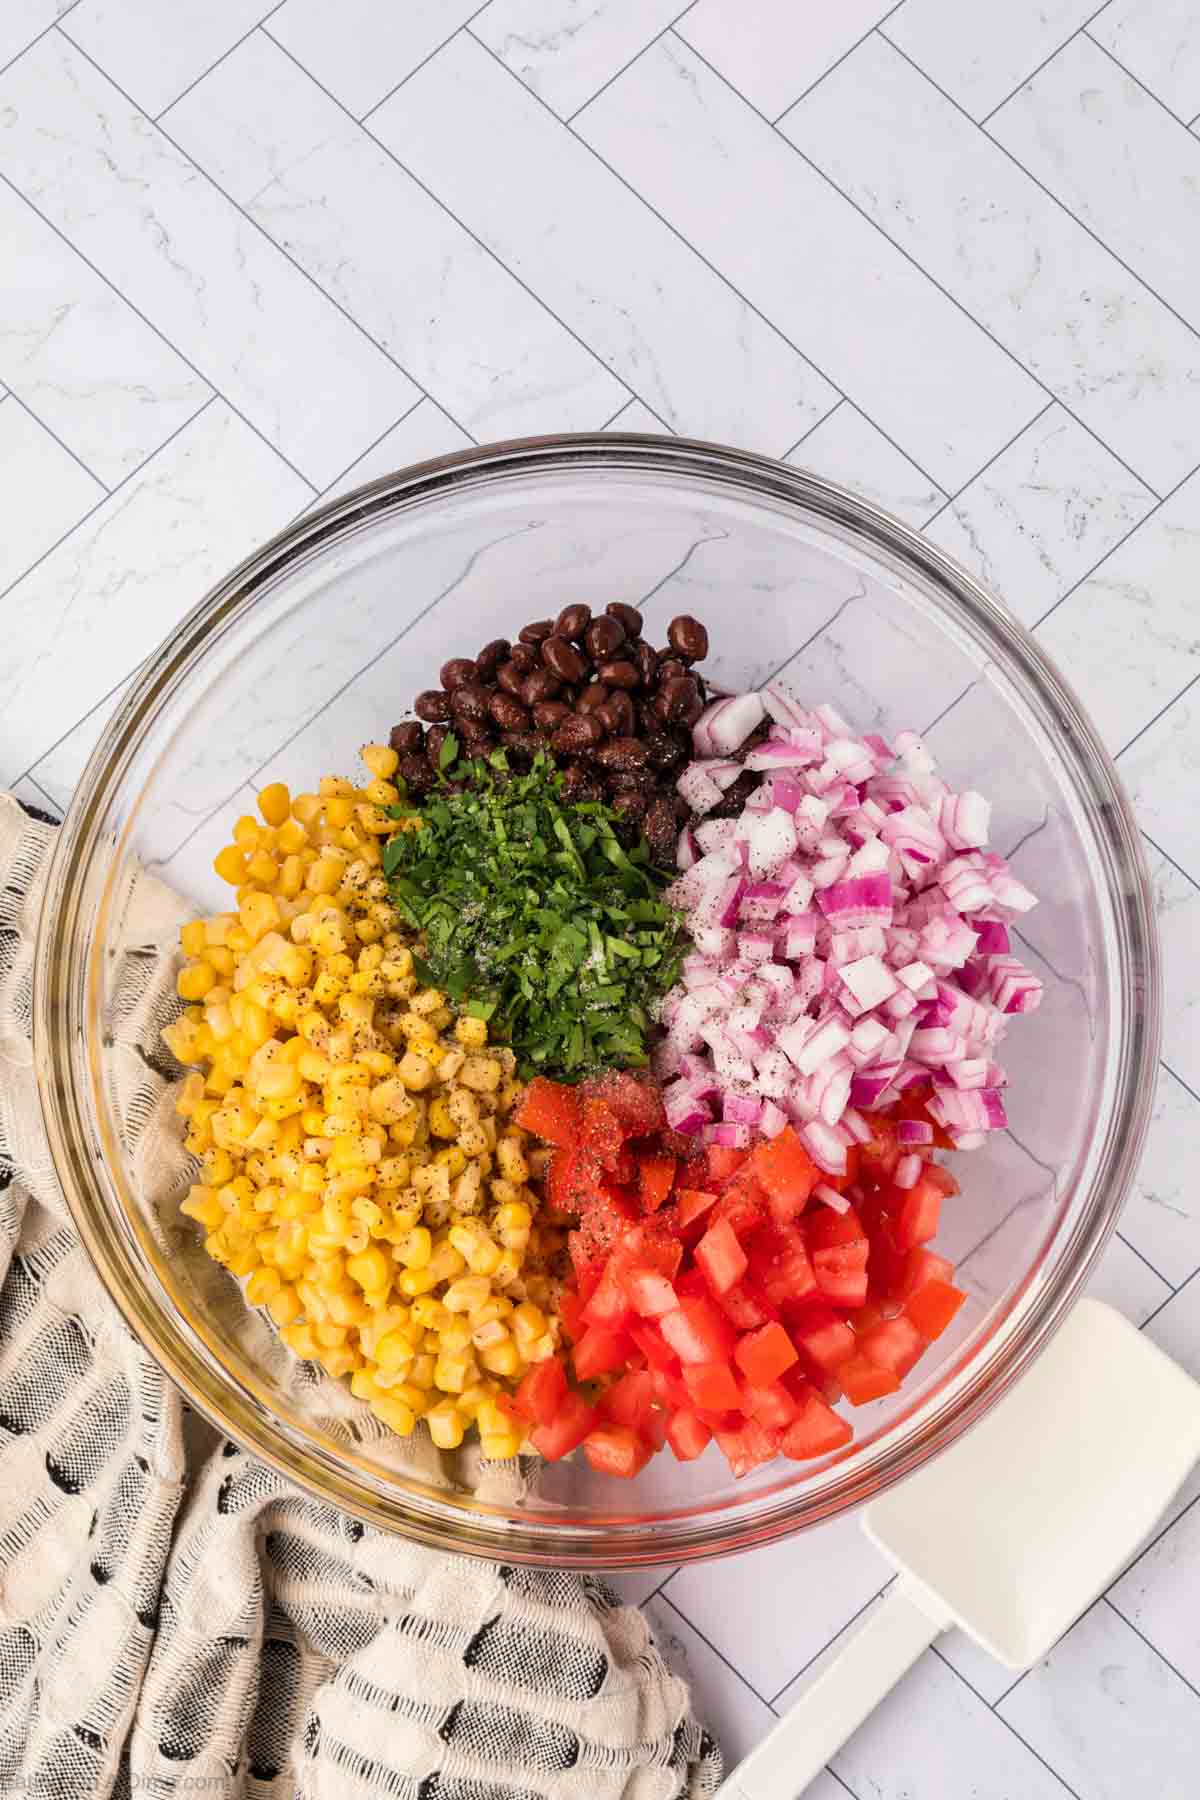 A glass bowl contains prepped ingredients for a delicious black bean salsa: black beans, diced red onion, chopped tomatoes, corn kernels, and fresh cilantro. The bowl is placed on a patterned tiled surface next to a white spatula and a textured cloth.